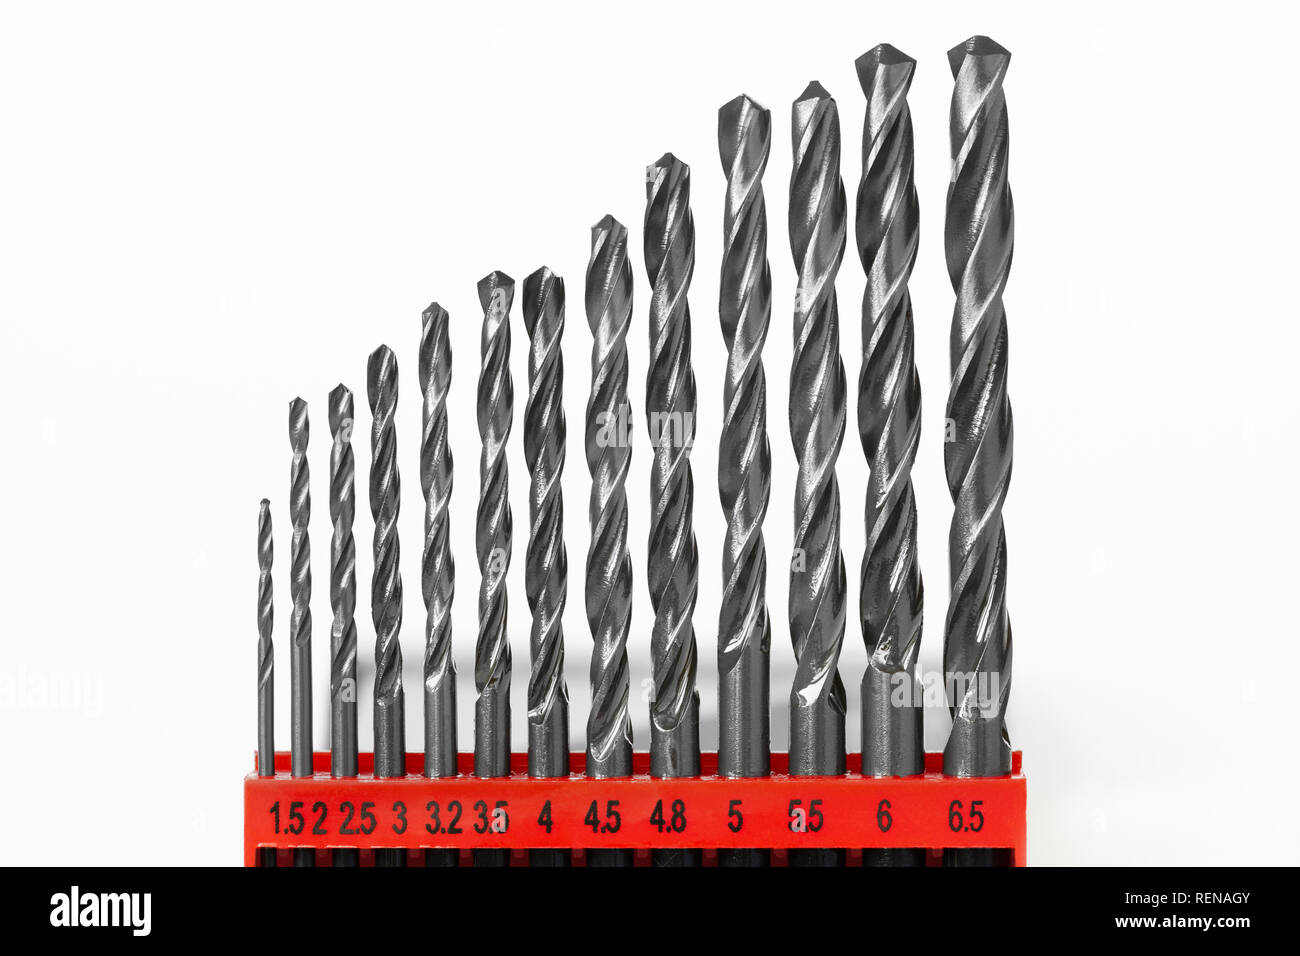 Set of drill bits for metal in a red holder on a white background Stock Photo